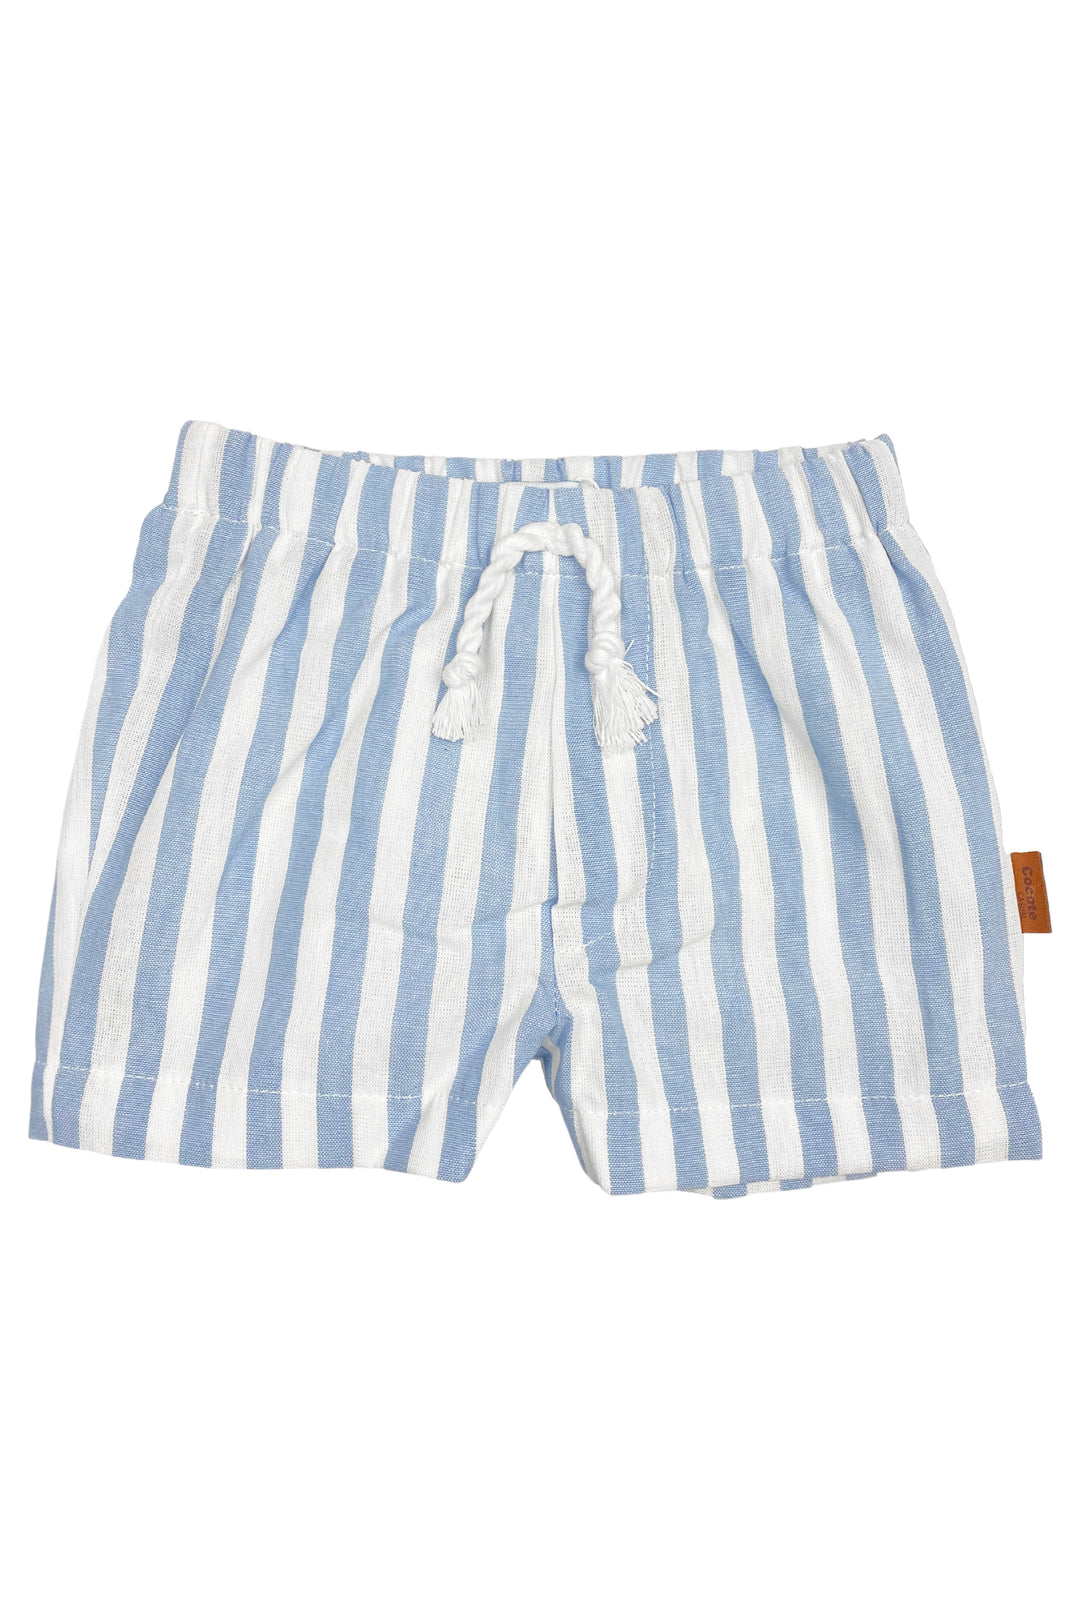 Cocote "Lawrence" Striped Shorts | Millie and John